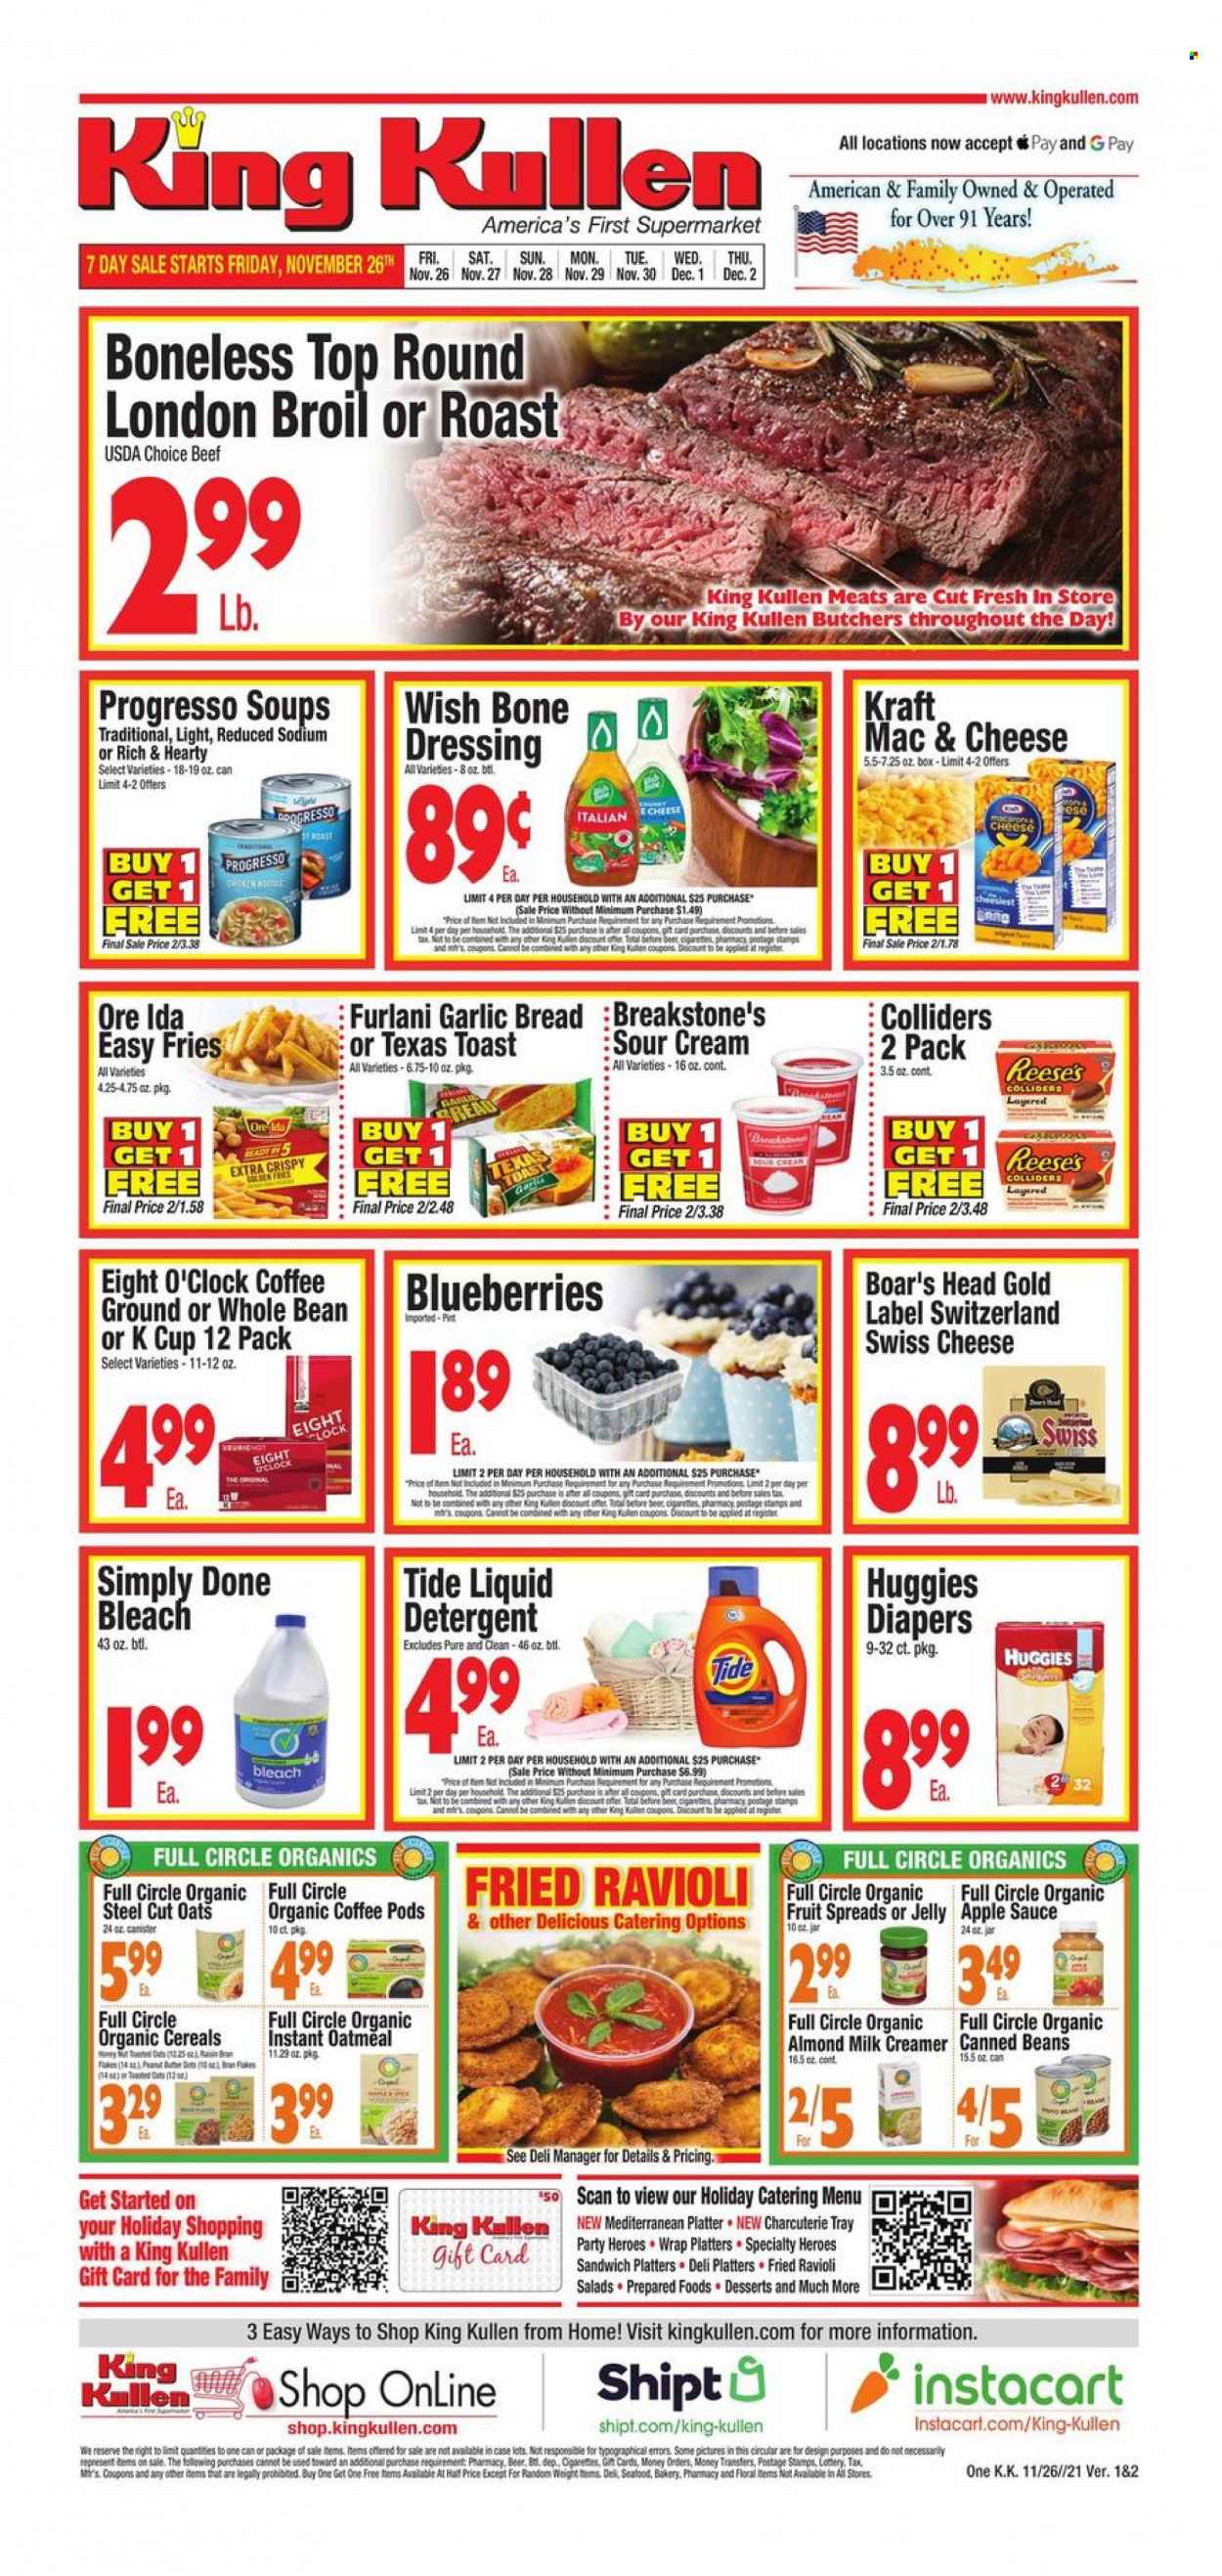 thumbnail - King Kullen Flyer - 11/26/2021 - 12/02/2021 - Sales products - bread, blueberries, ravioli, sandwich, sauce, Progresso, Kraft®, swiss cheese, sour cream, creamer, almond creamer, Reese's, potato fries, Ore-Ida, jelly, oatmeal, oats, cereals, Raisin Bran, dressing, apple sauce, coffee pods, organic coffee, coffee capsules, K-Cups, Eight O'Clock, beer, Huggies, nappies, detergent, bleach, Tide, liquid detergent, canister. Page 1.